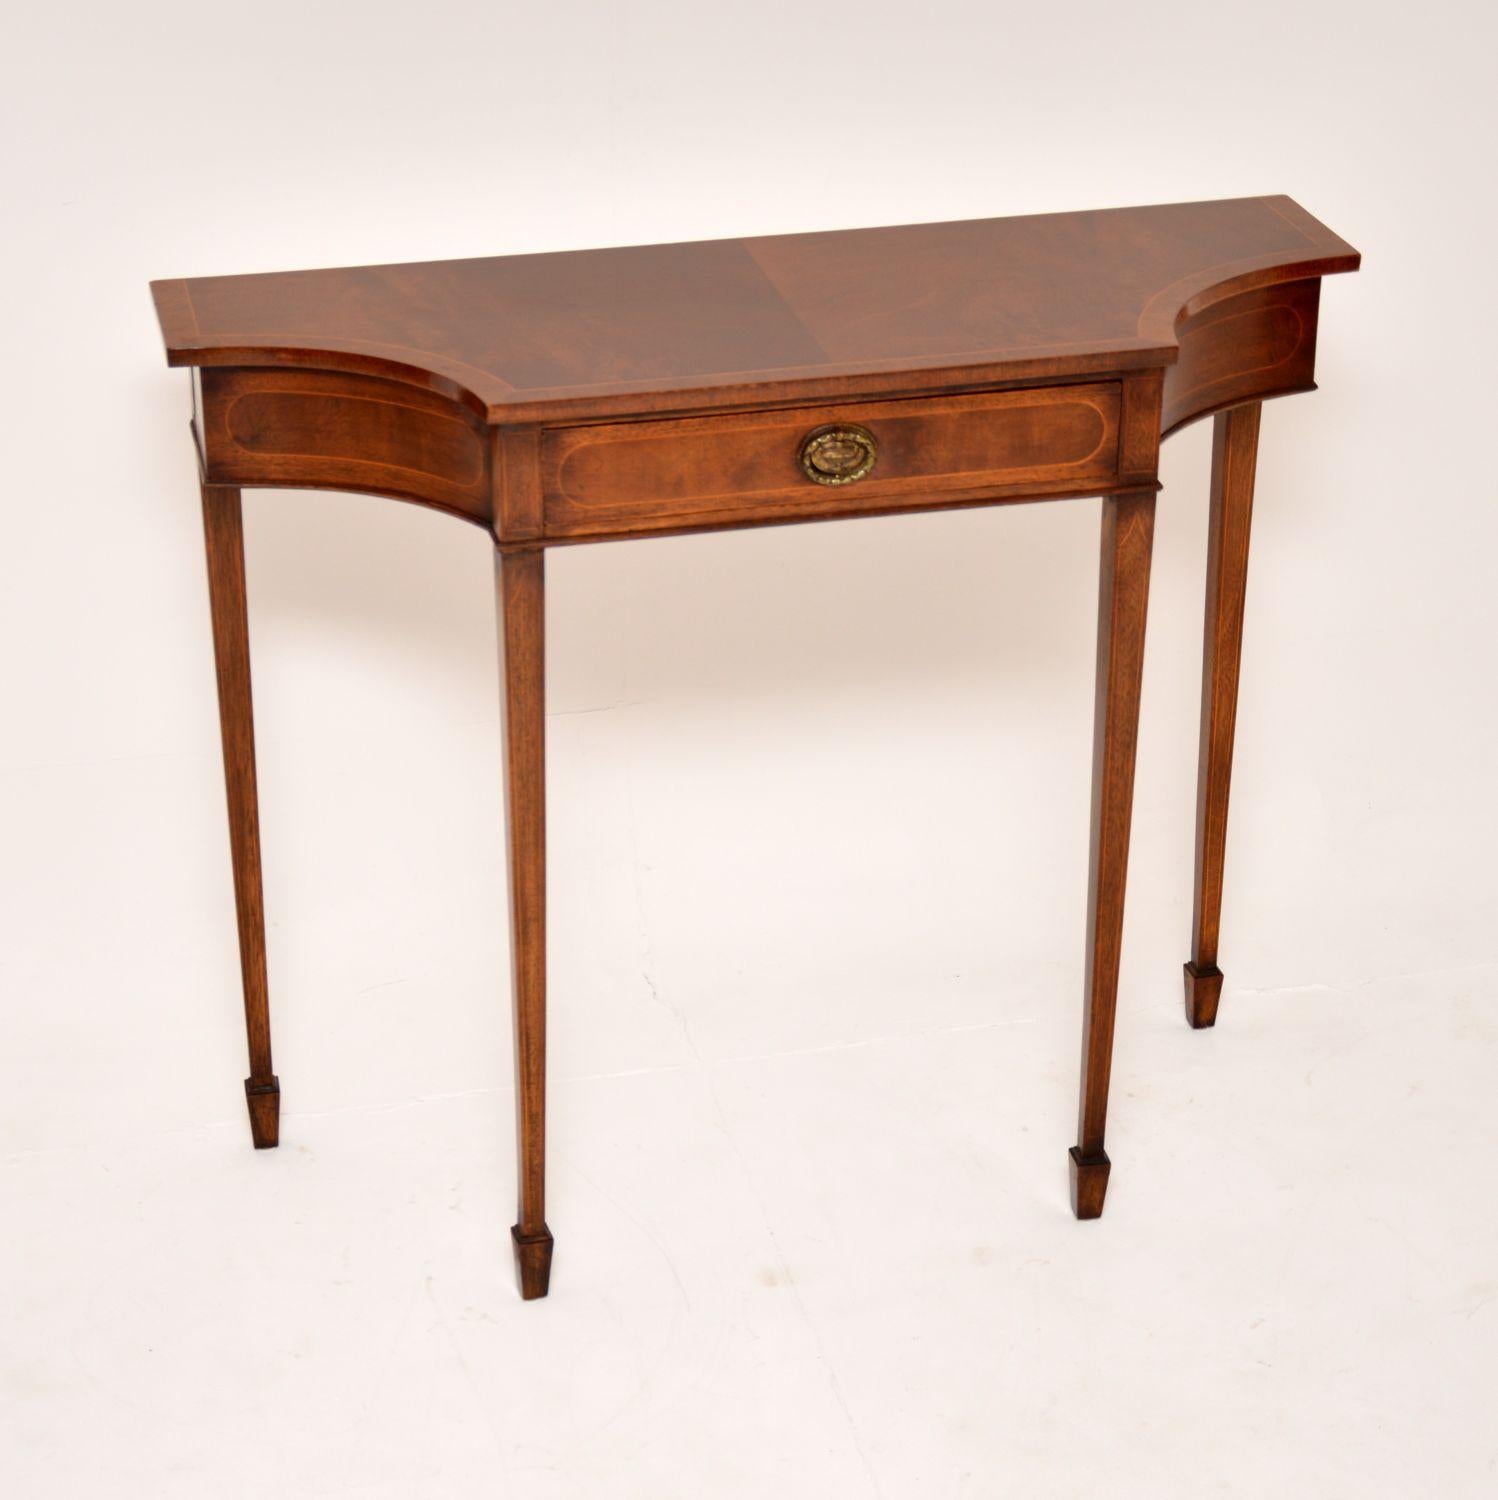 A beautiful and elegant antique console table in the Sheraton style. This was made in England, it dates from around the 1950’s.

The quality is excellent, this has a fine and sturdy build. The shaped top has a single drawer and sits on tapered